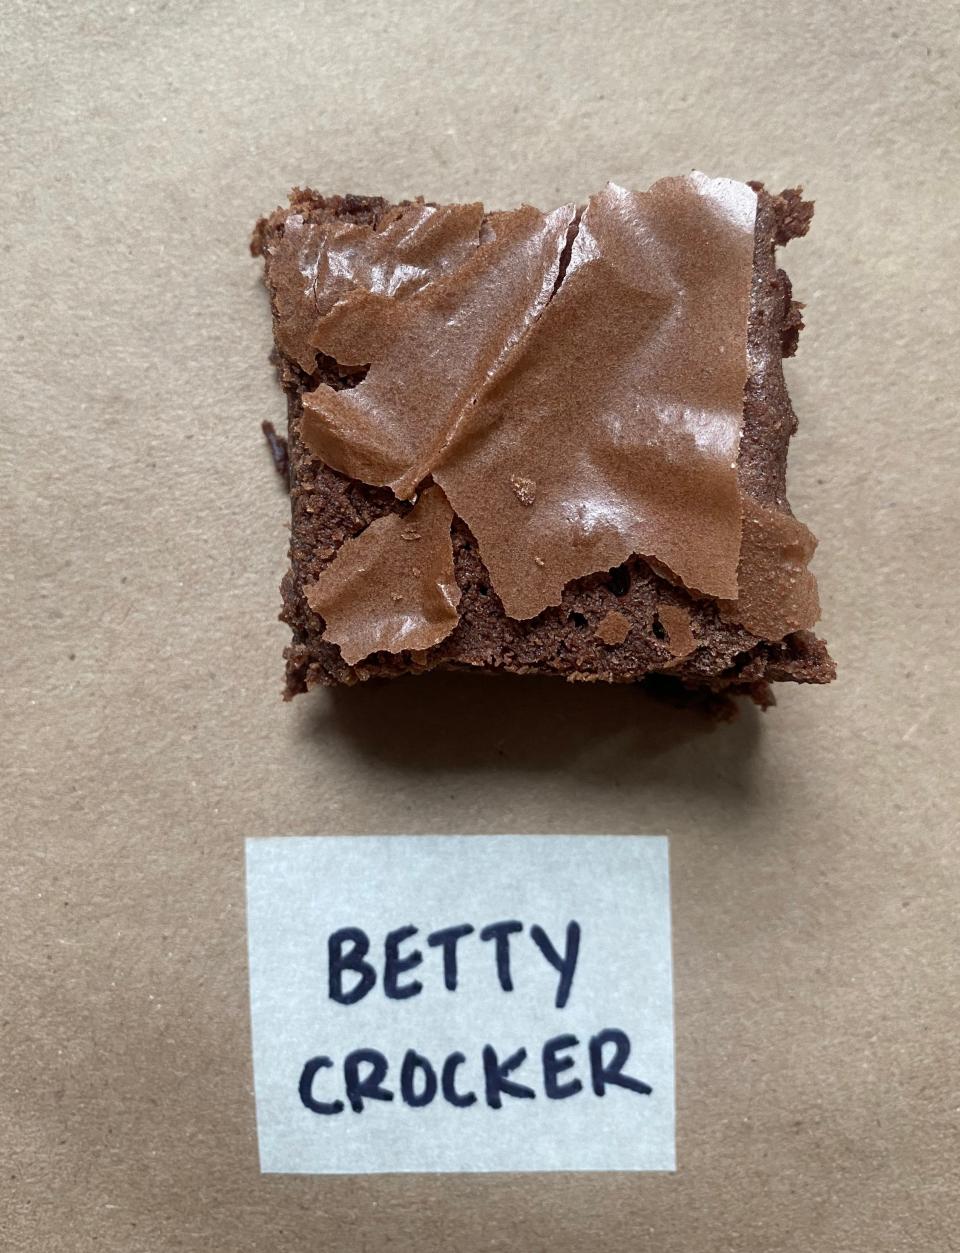 A close-up of a brownie with a 'Betty Crocker' label in front